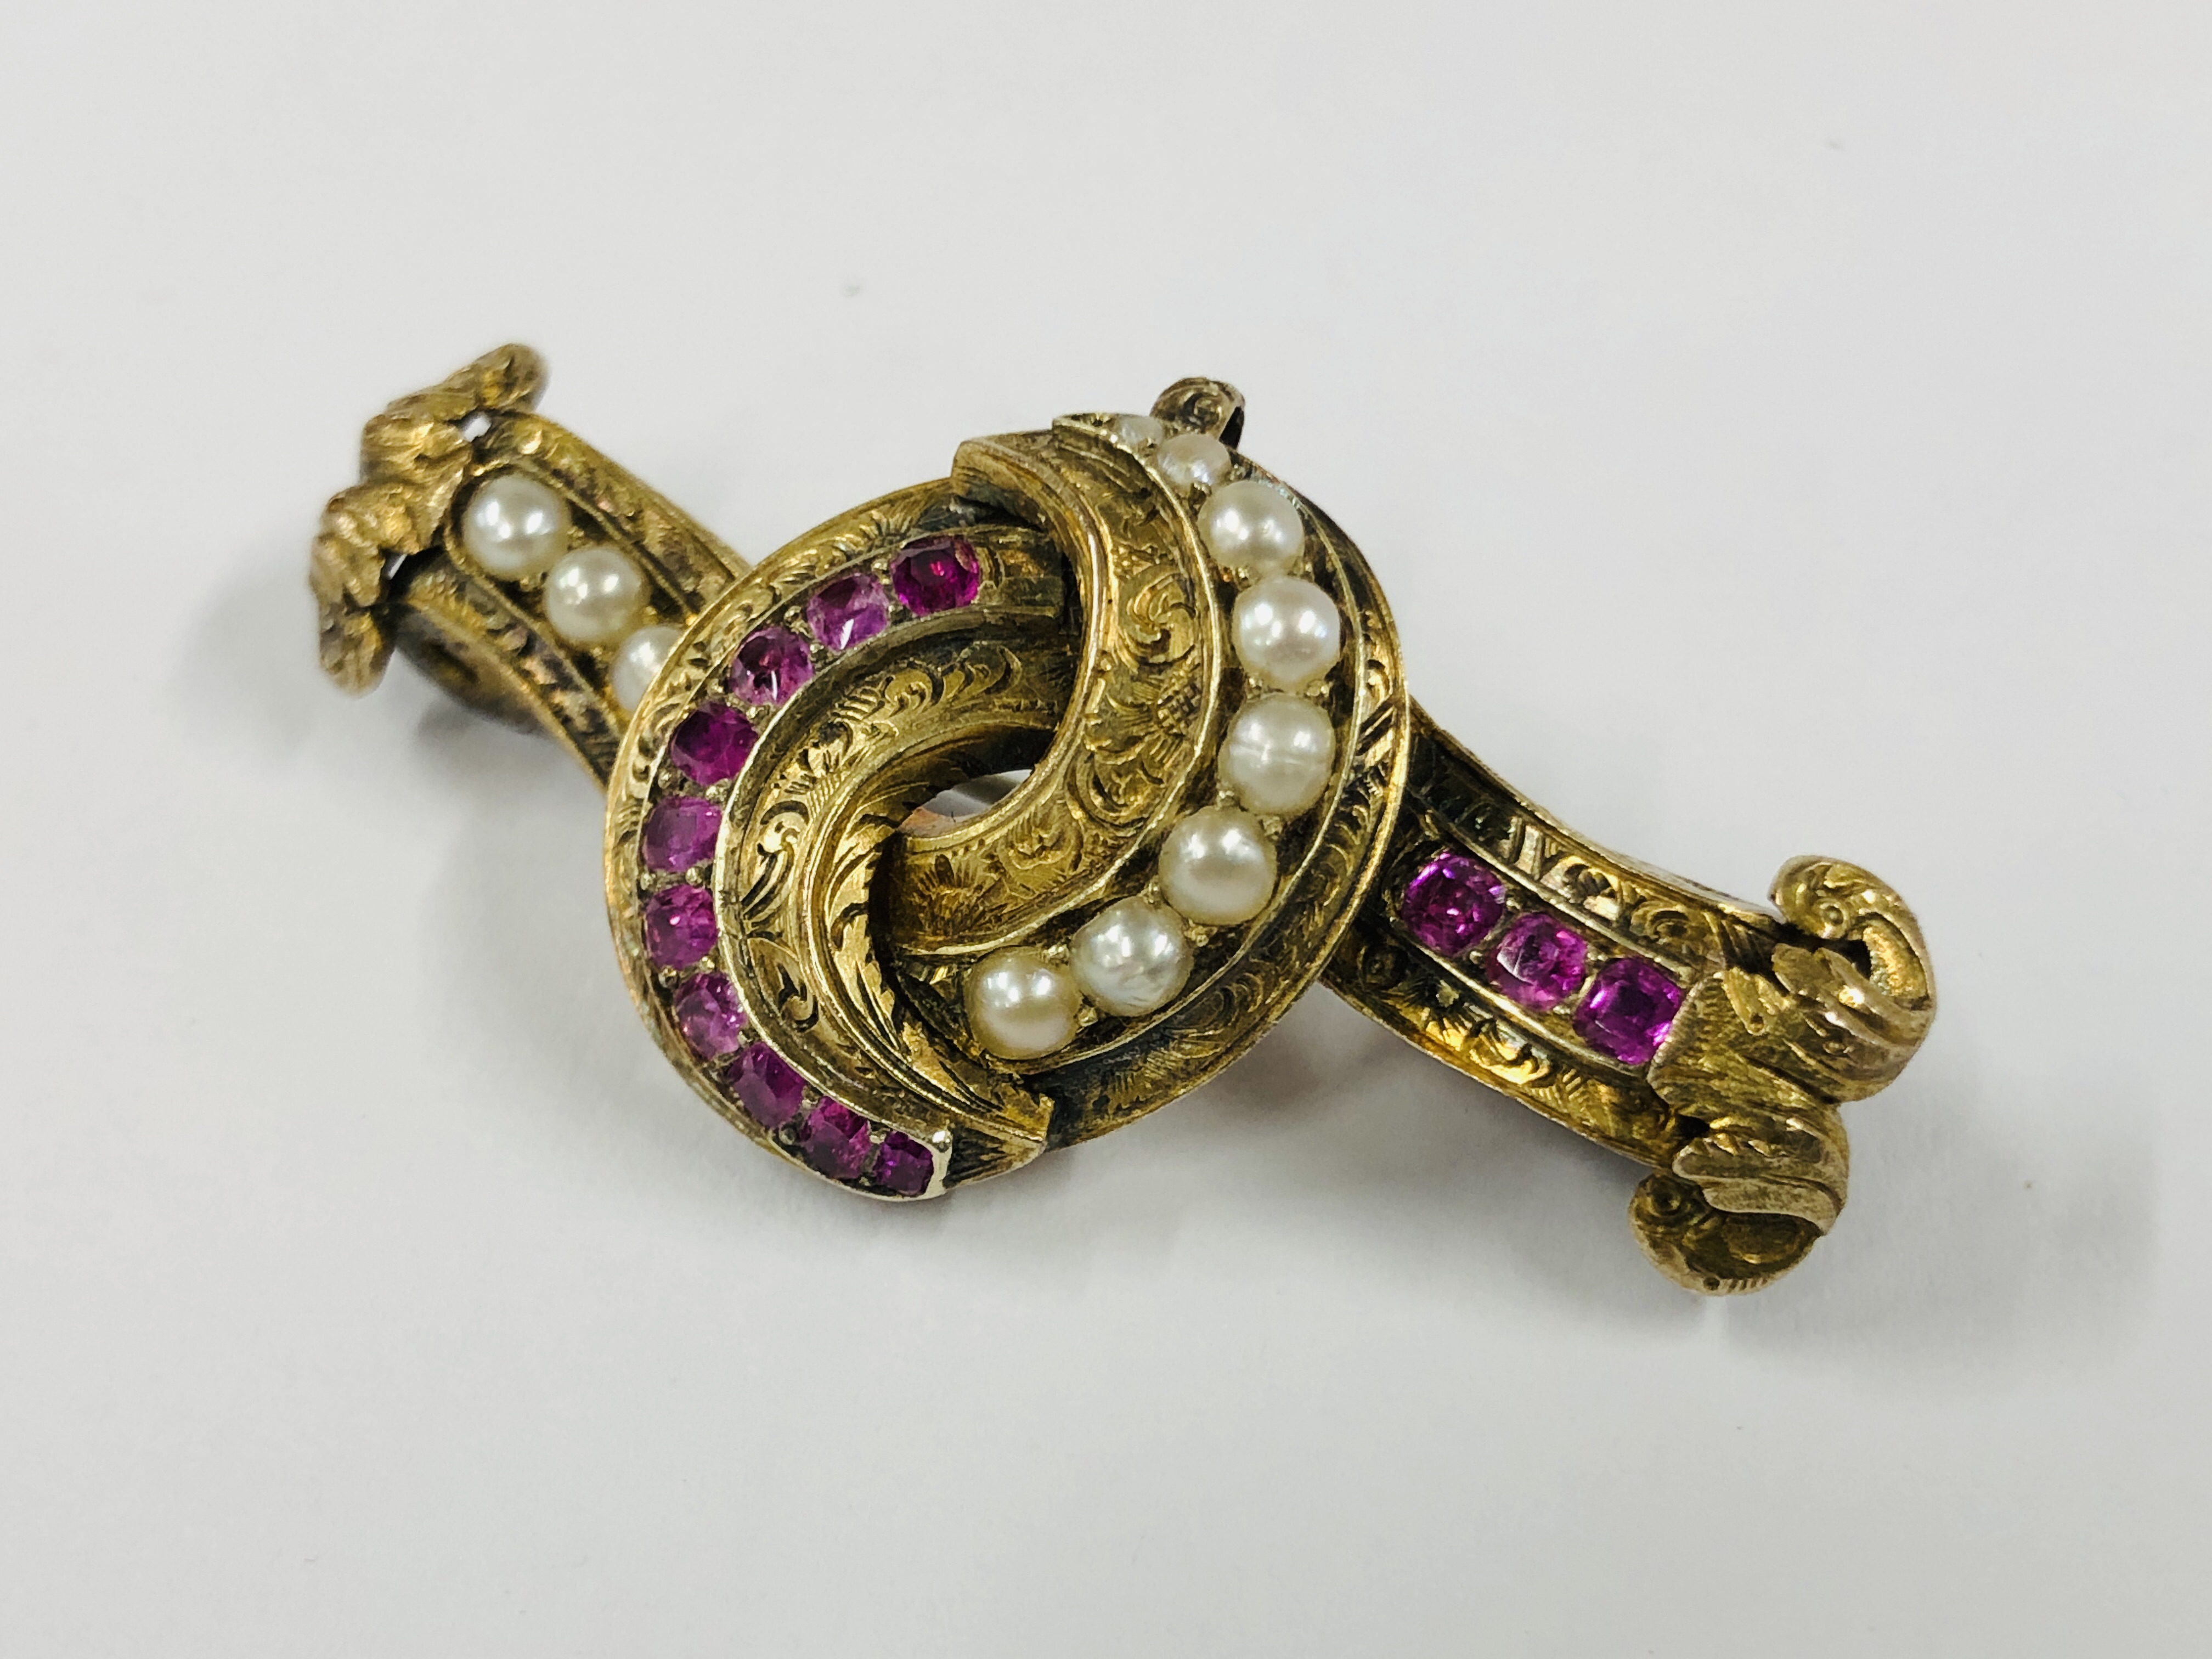 AN ANTIQUE GILT METAL PENDANT BROOCH SET WITH GARNETS & SEED PEARLS - L 5CM. - Image 3 of 11